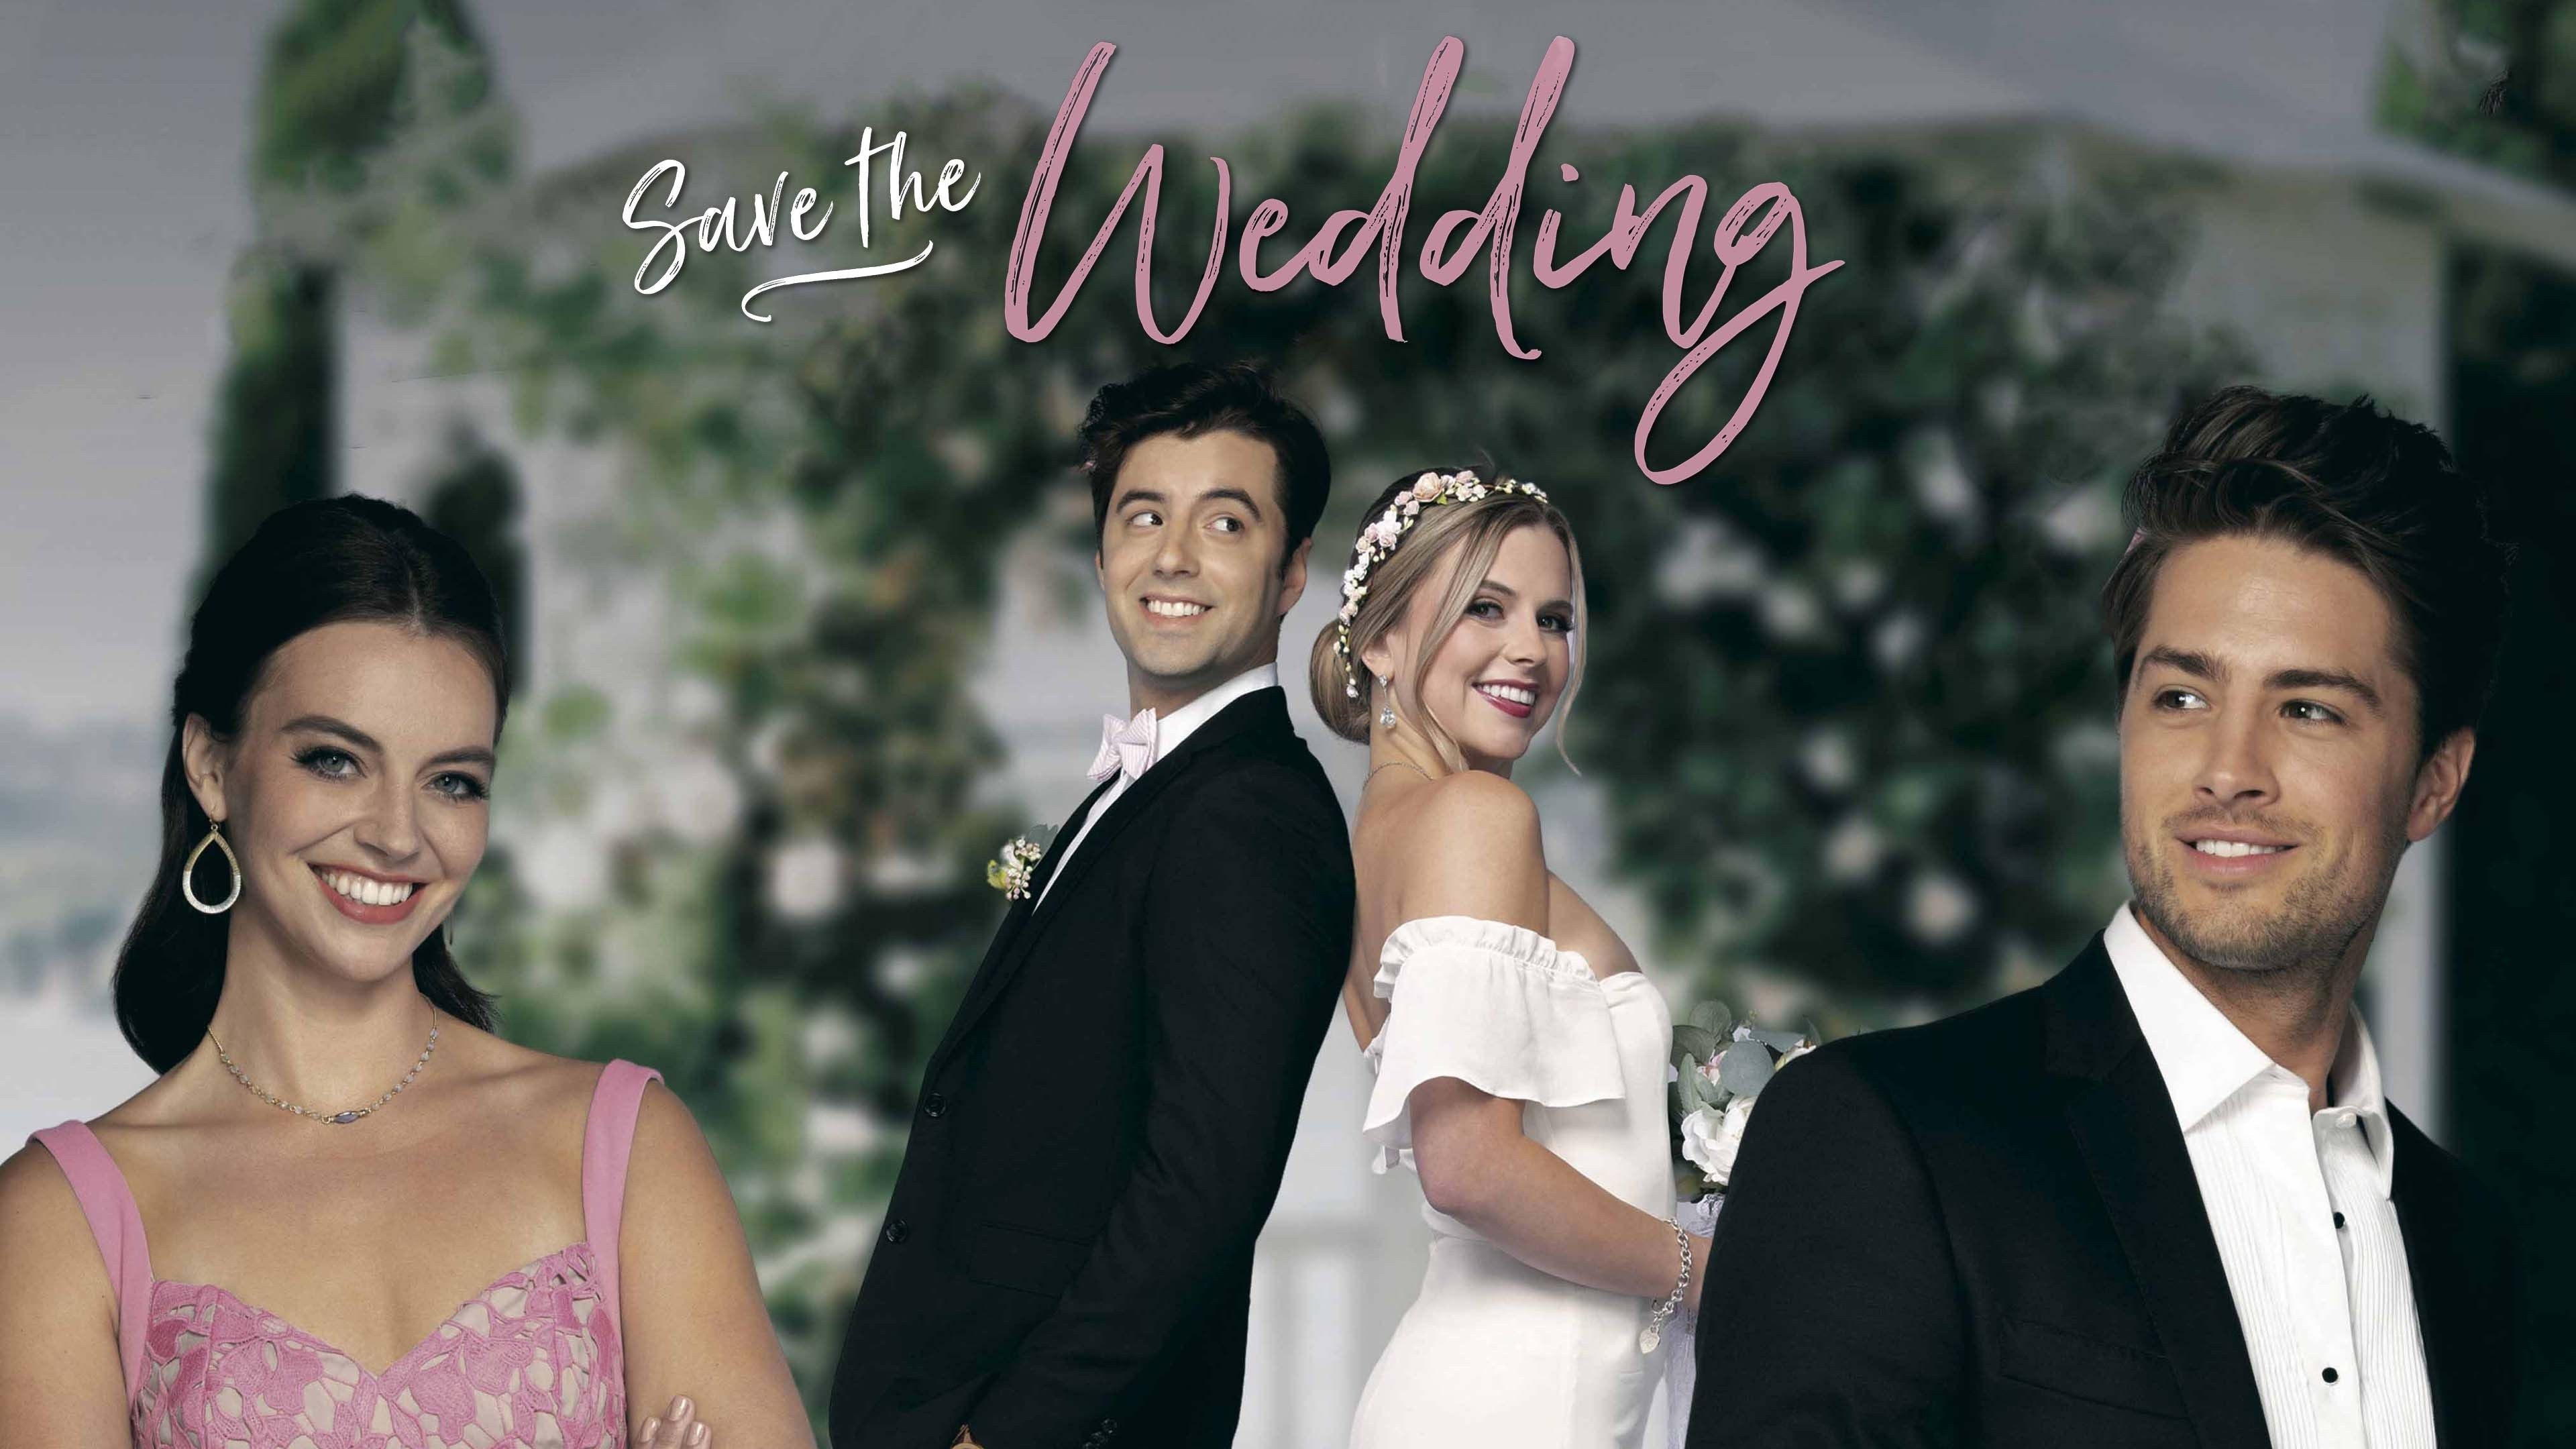 The Wedding - Rotten Tomatoes